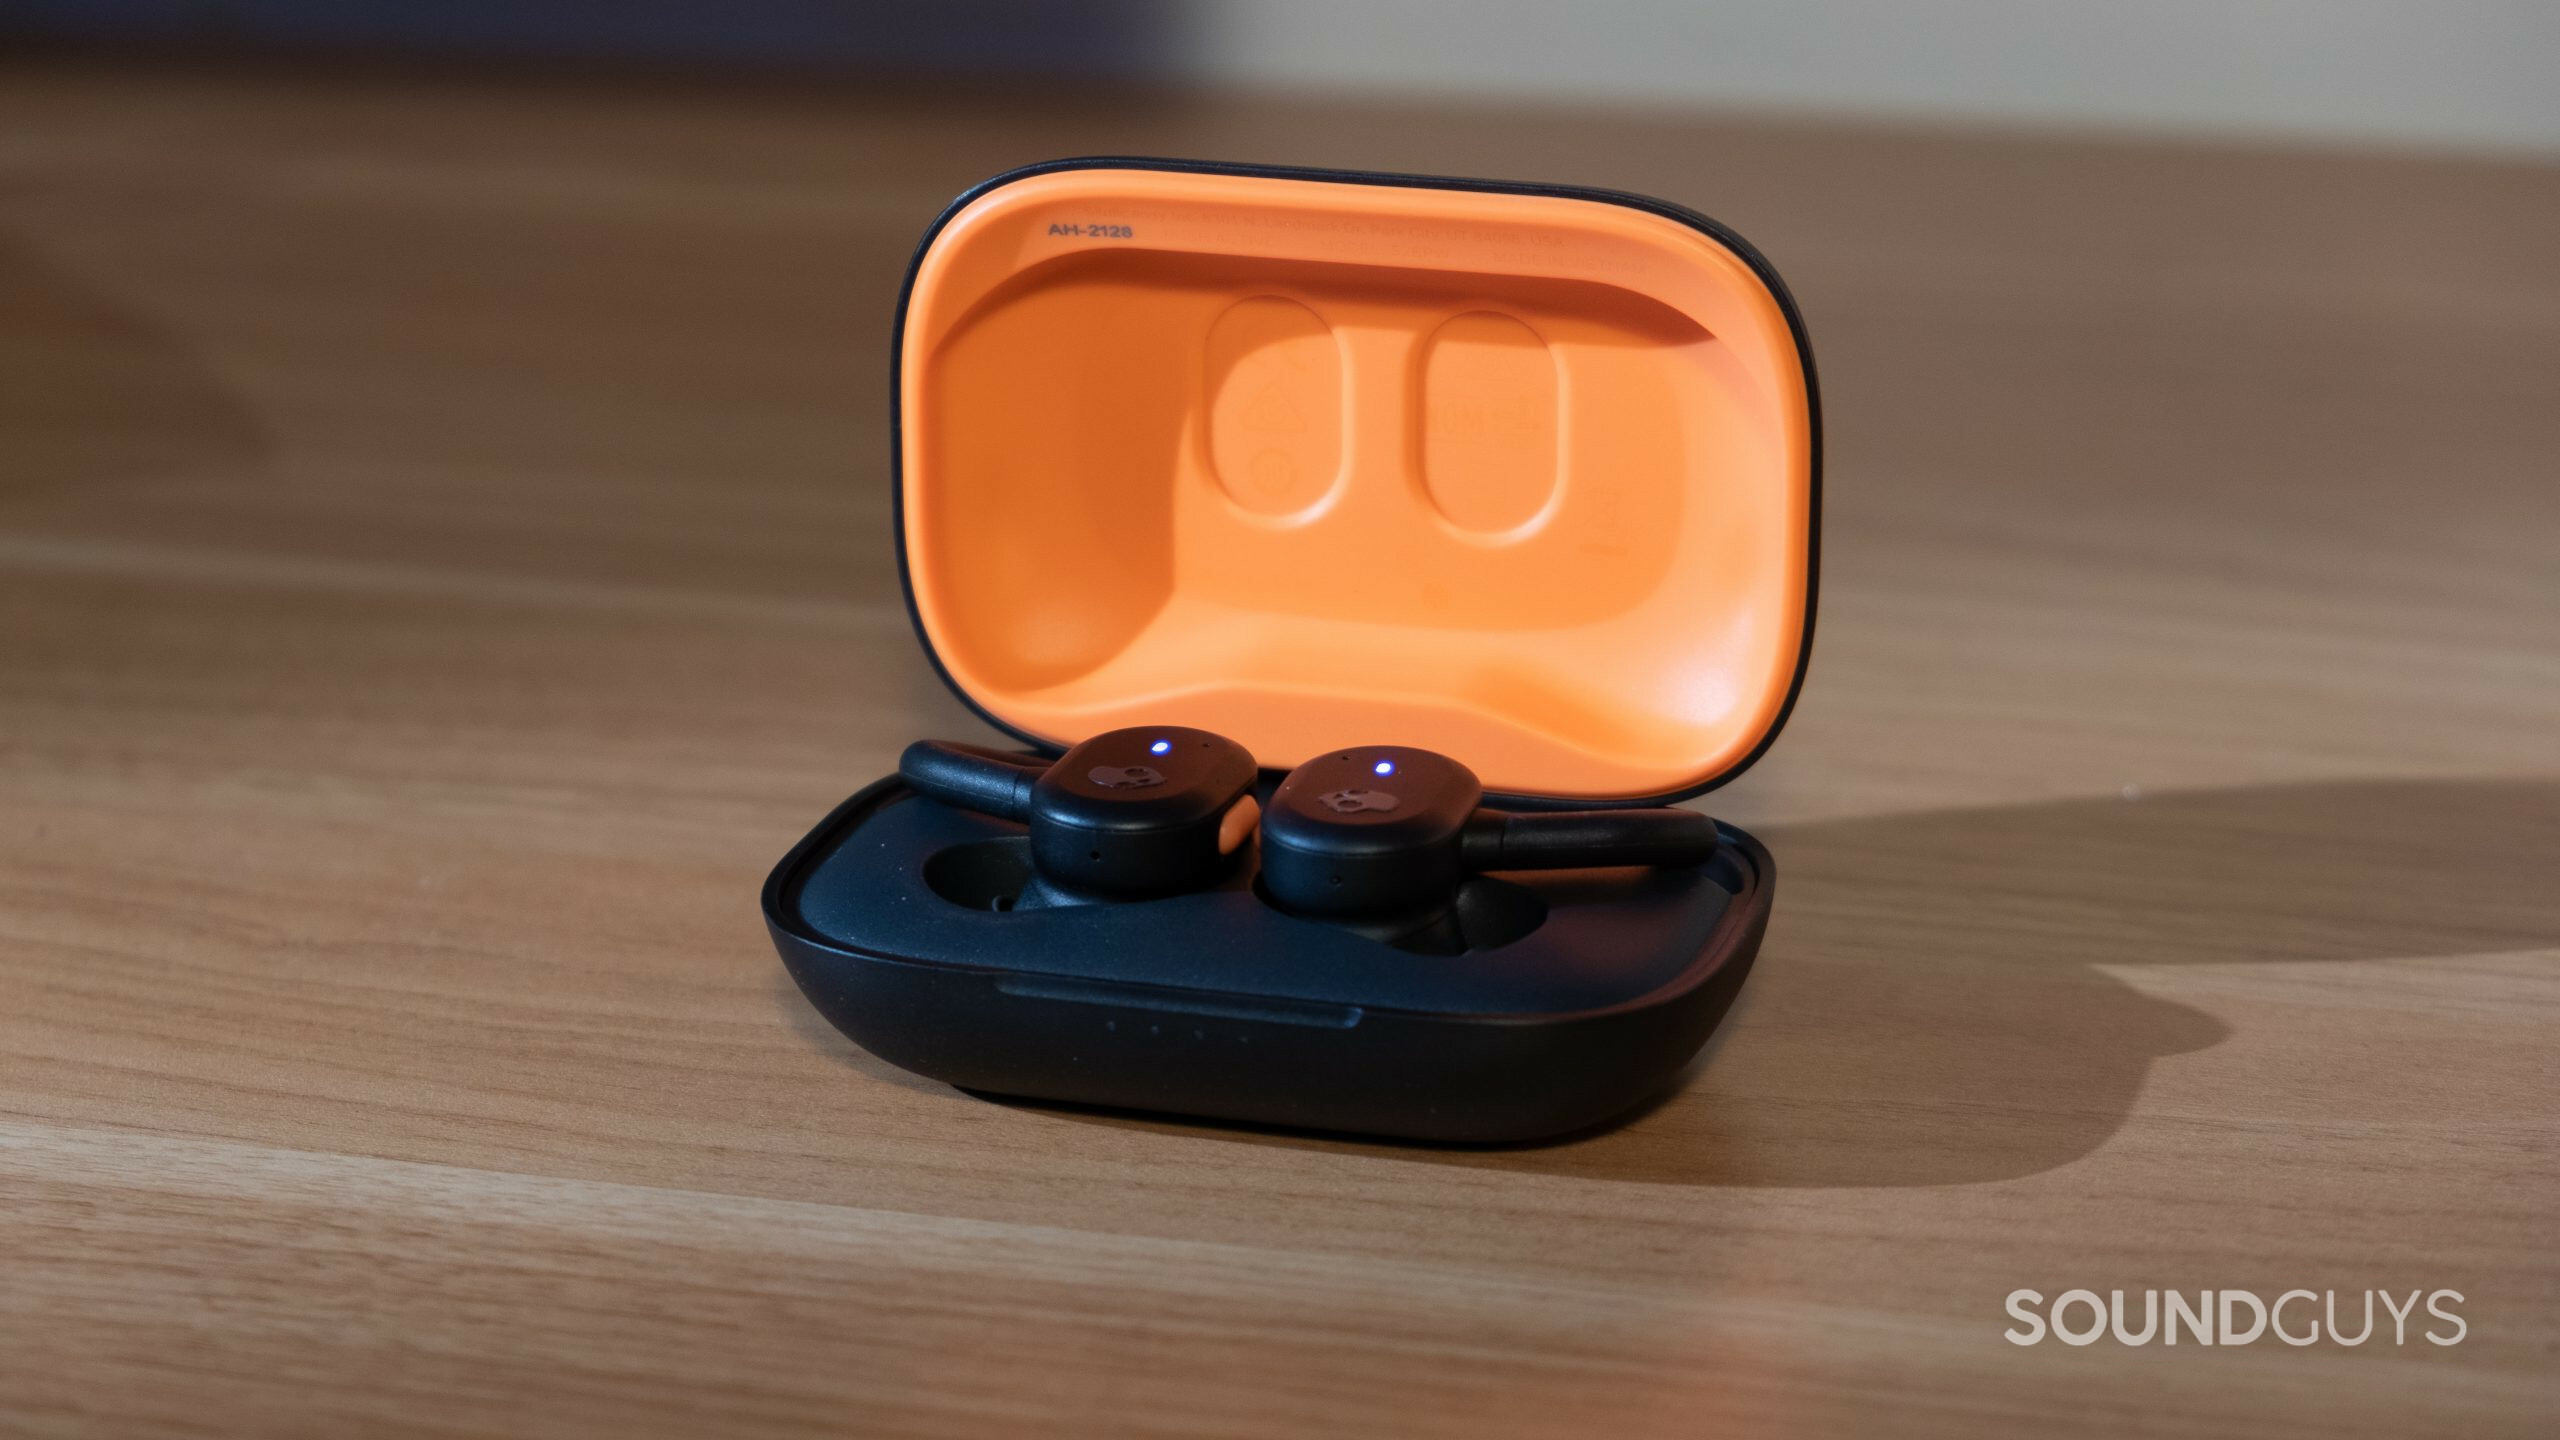 Push Active True Wireless Earbuds Featuring Skull-iQ technology